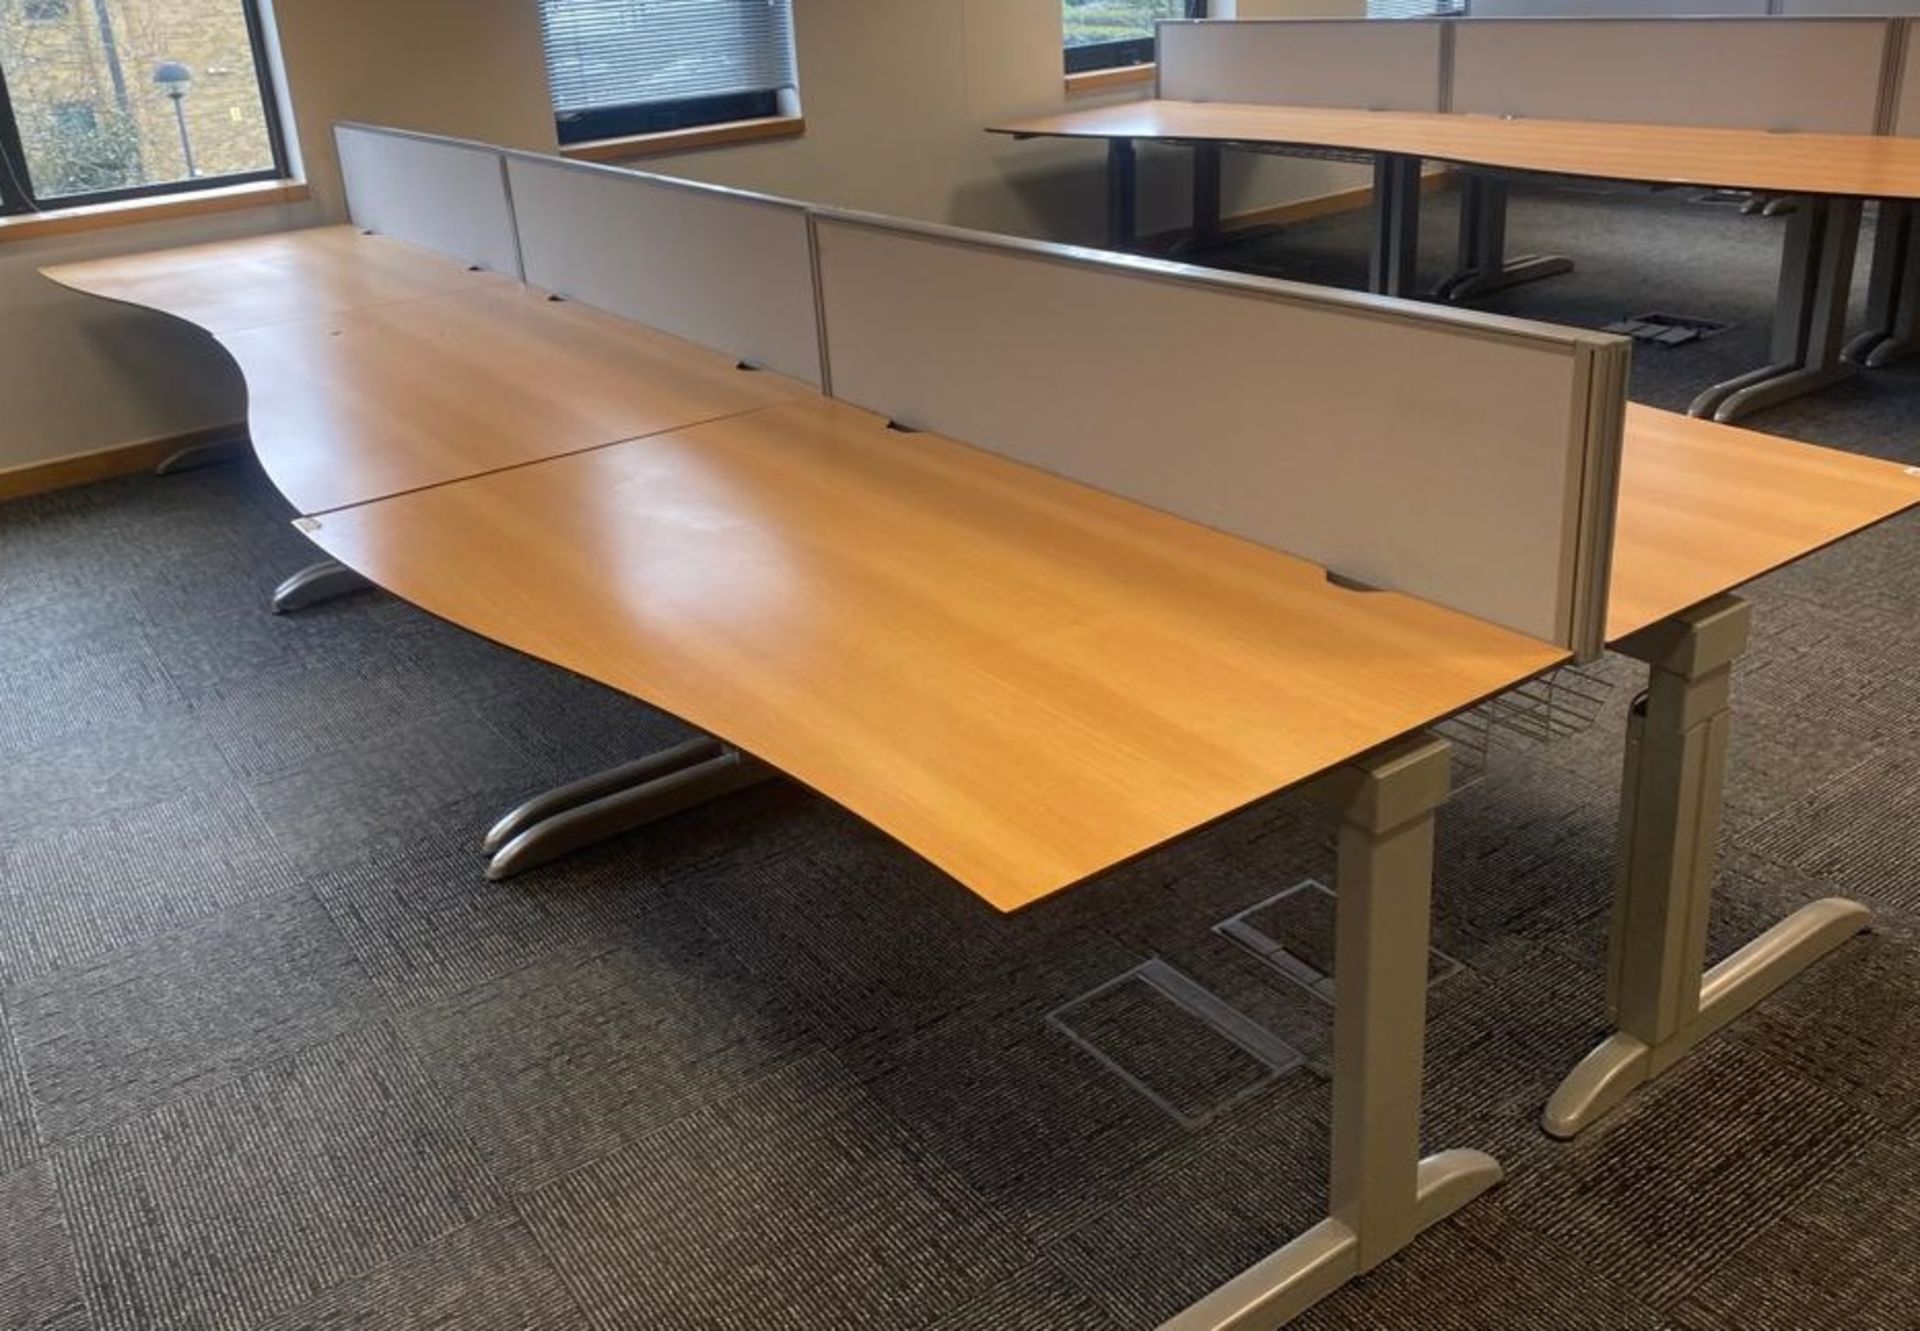 4 x Techo Wave Office Desks With Privacy Panels and Cable Tidy Cages - Beech Wood Finish with Grey - Image 6 of 20